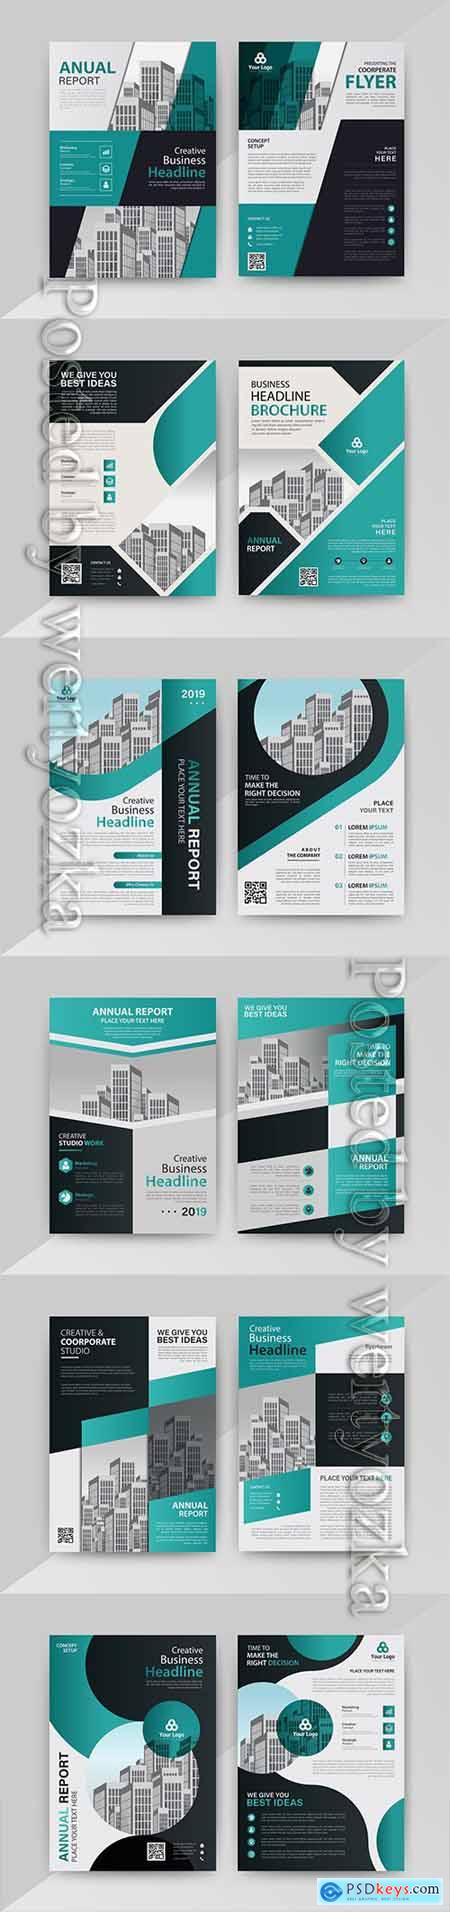 Business vector template for brochure, annual report, magazine # 12